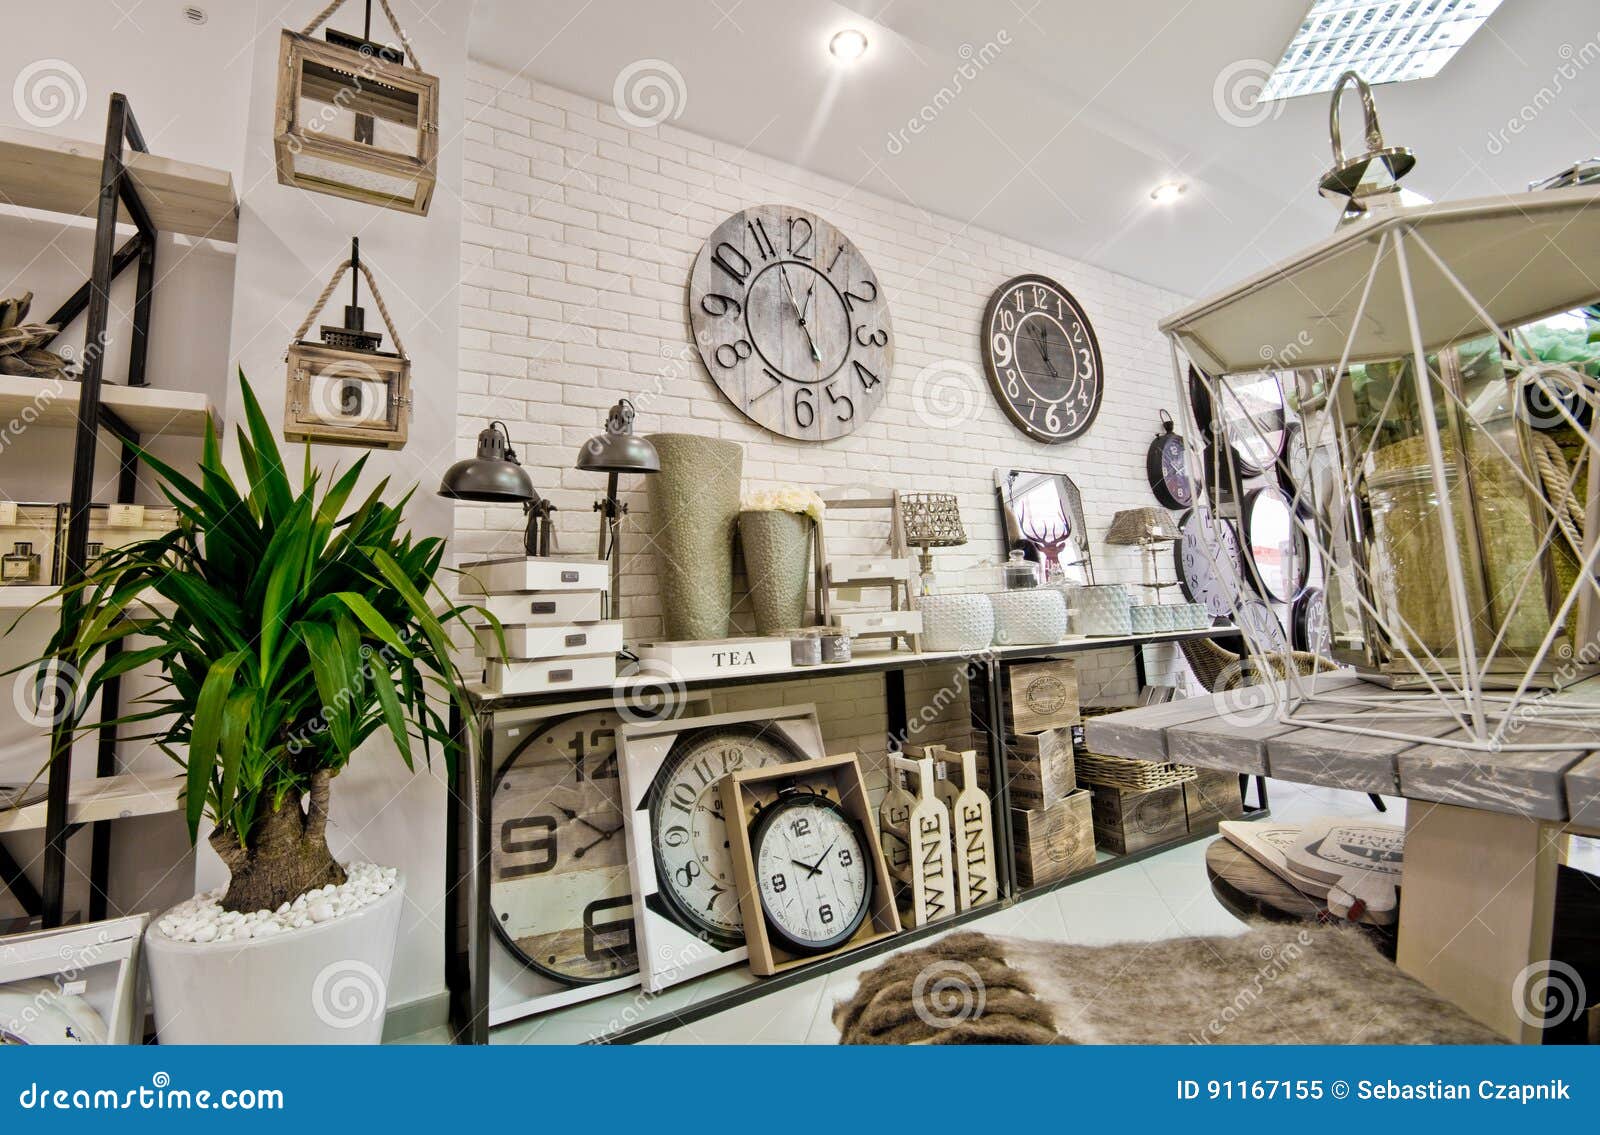 Home Decorations Shop Interior Stock Image Image of